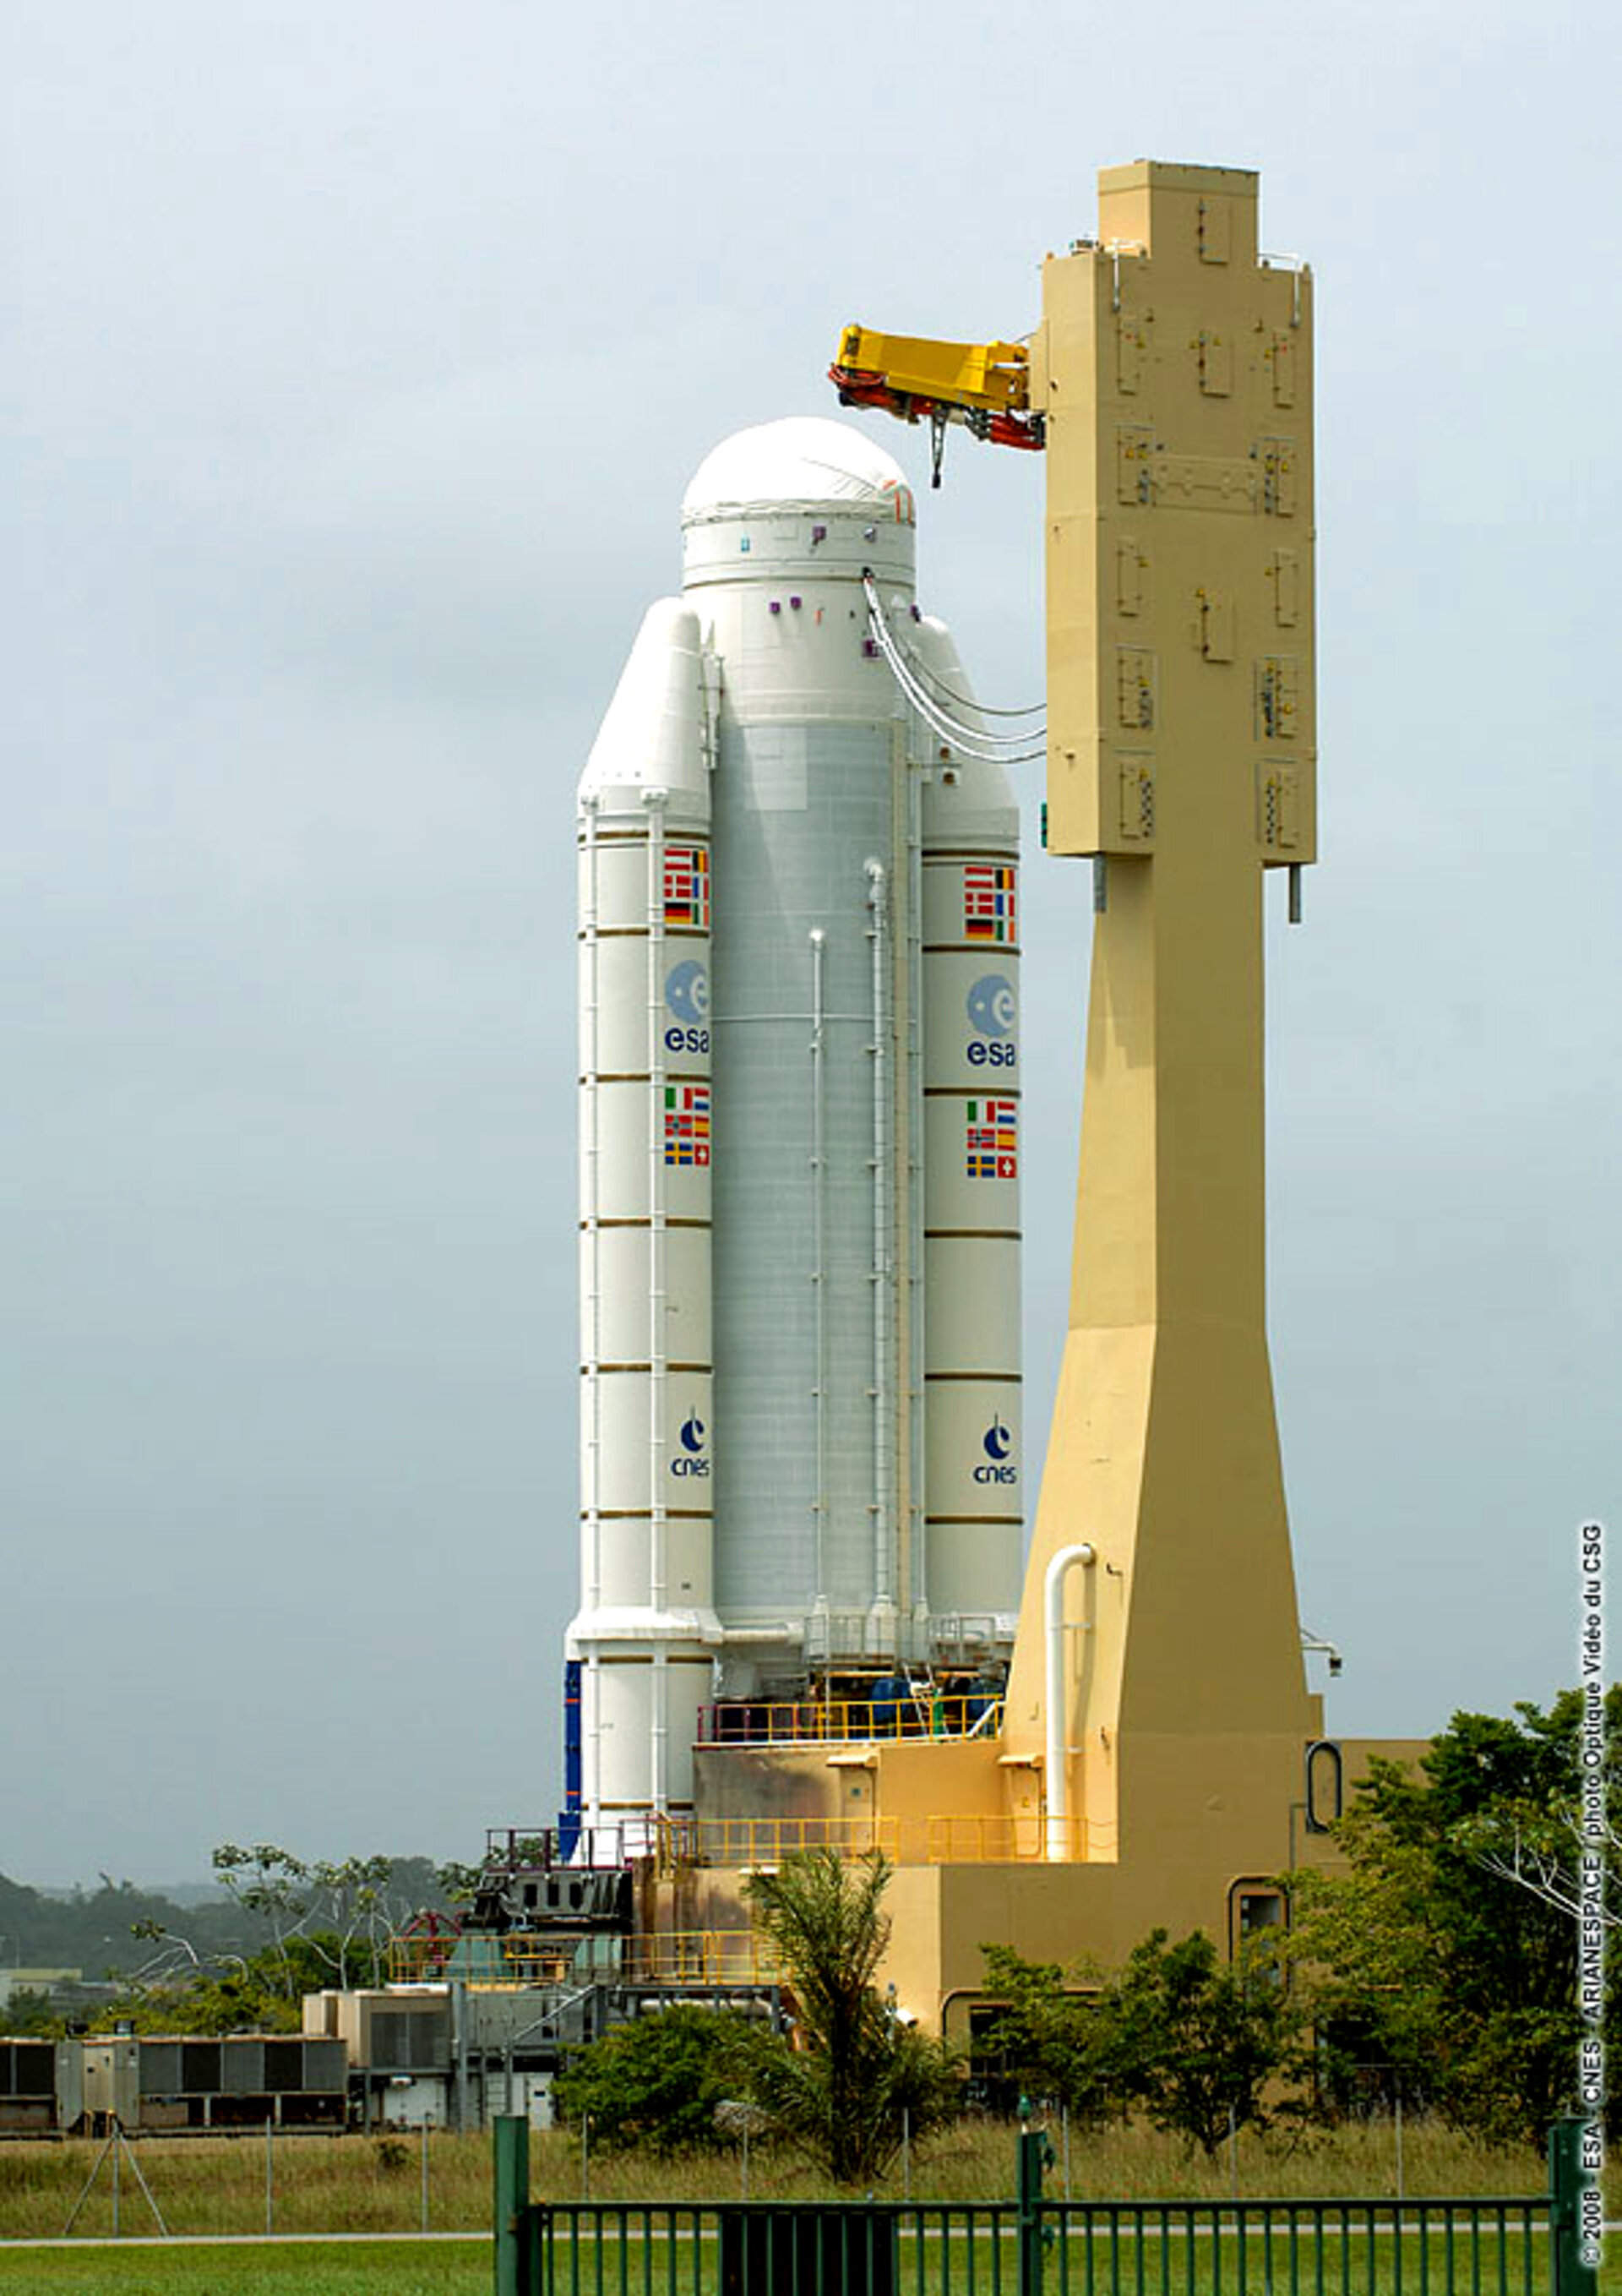 Transfer of the Ariane 5 ES launcher for Jules Verne to the Final Assembly Building at Europe's Spaceport in Kourou